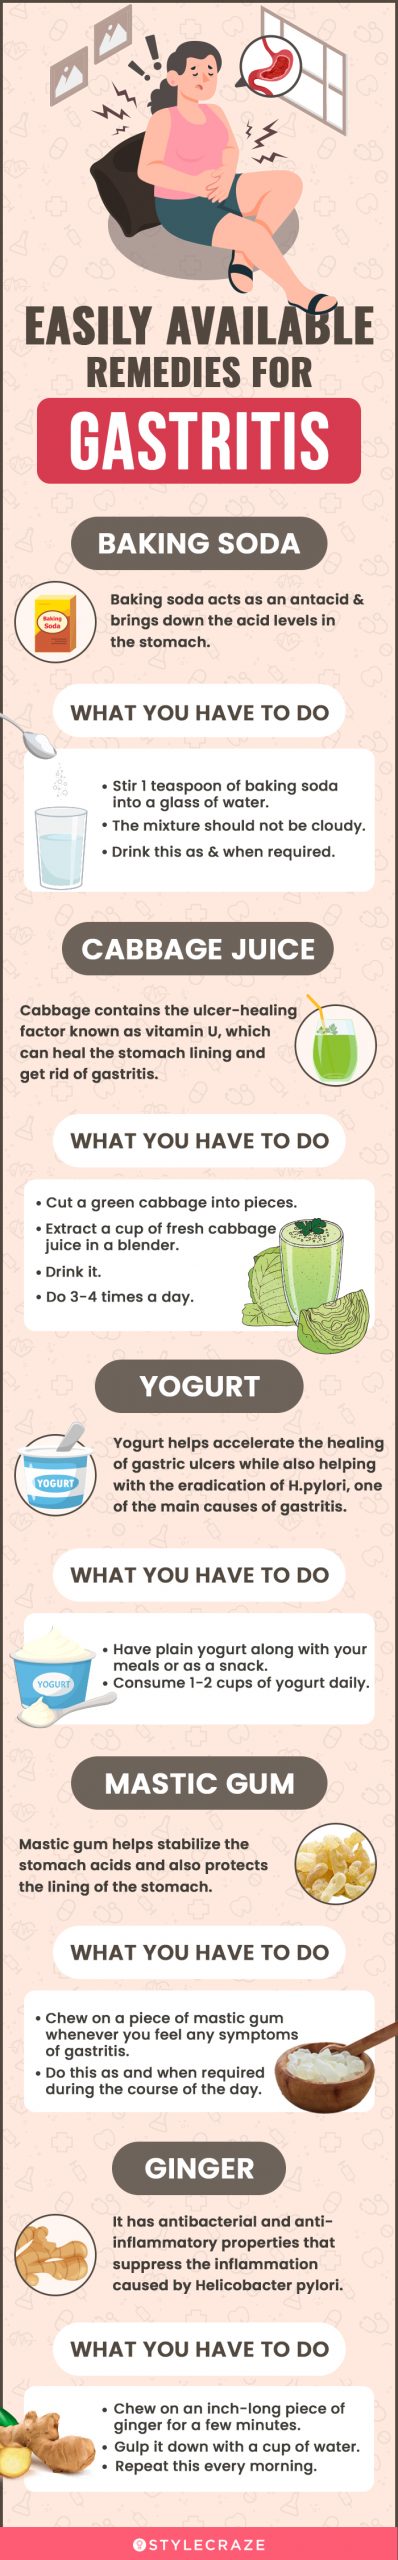 easily available remedies for gastritis [infographic]